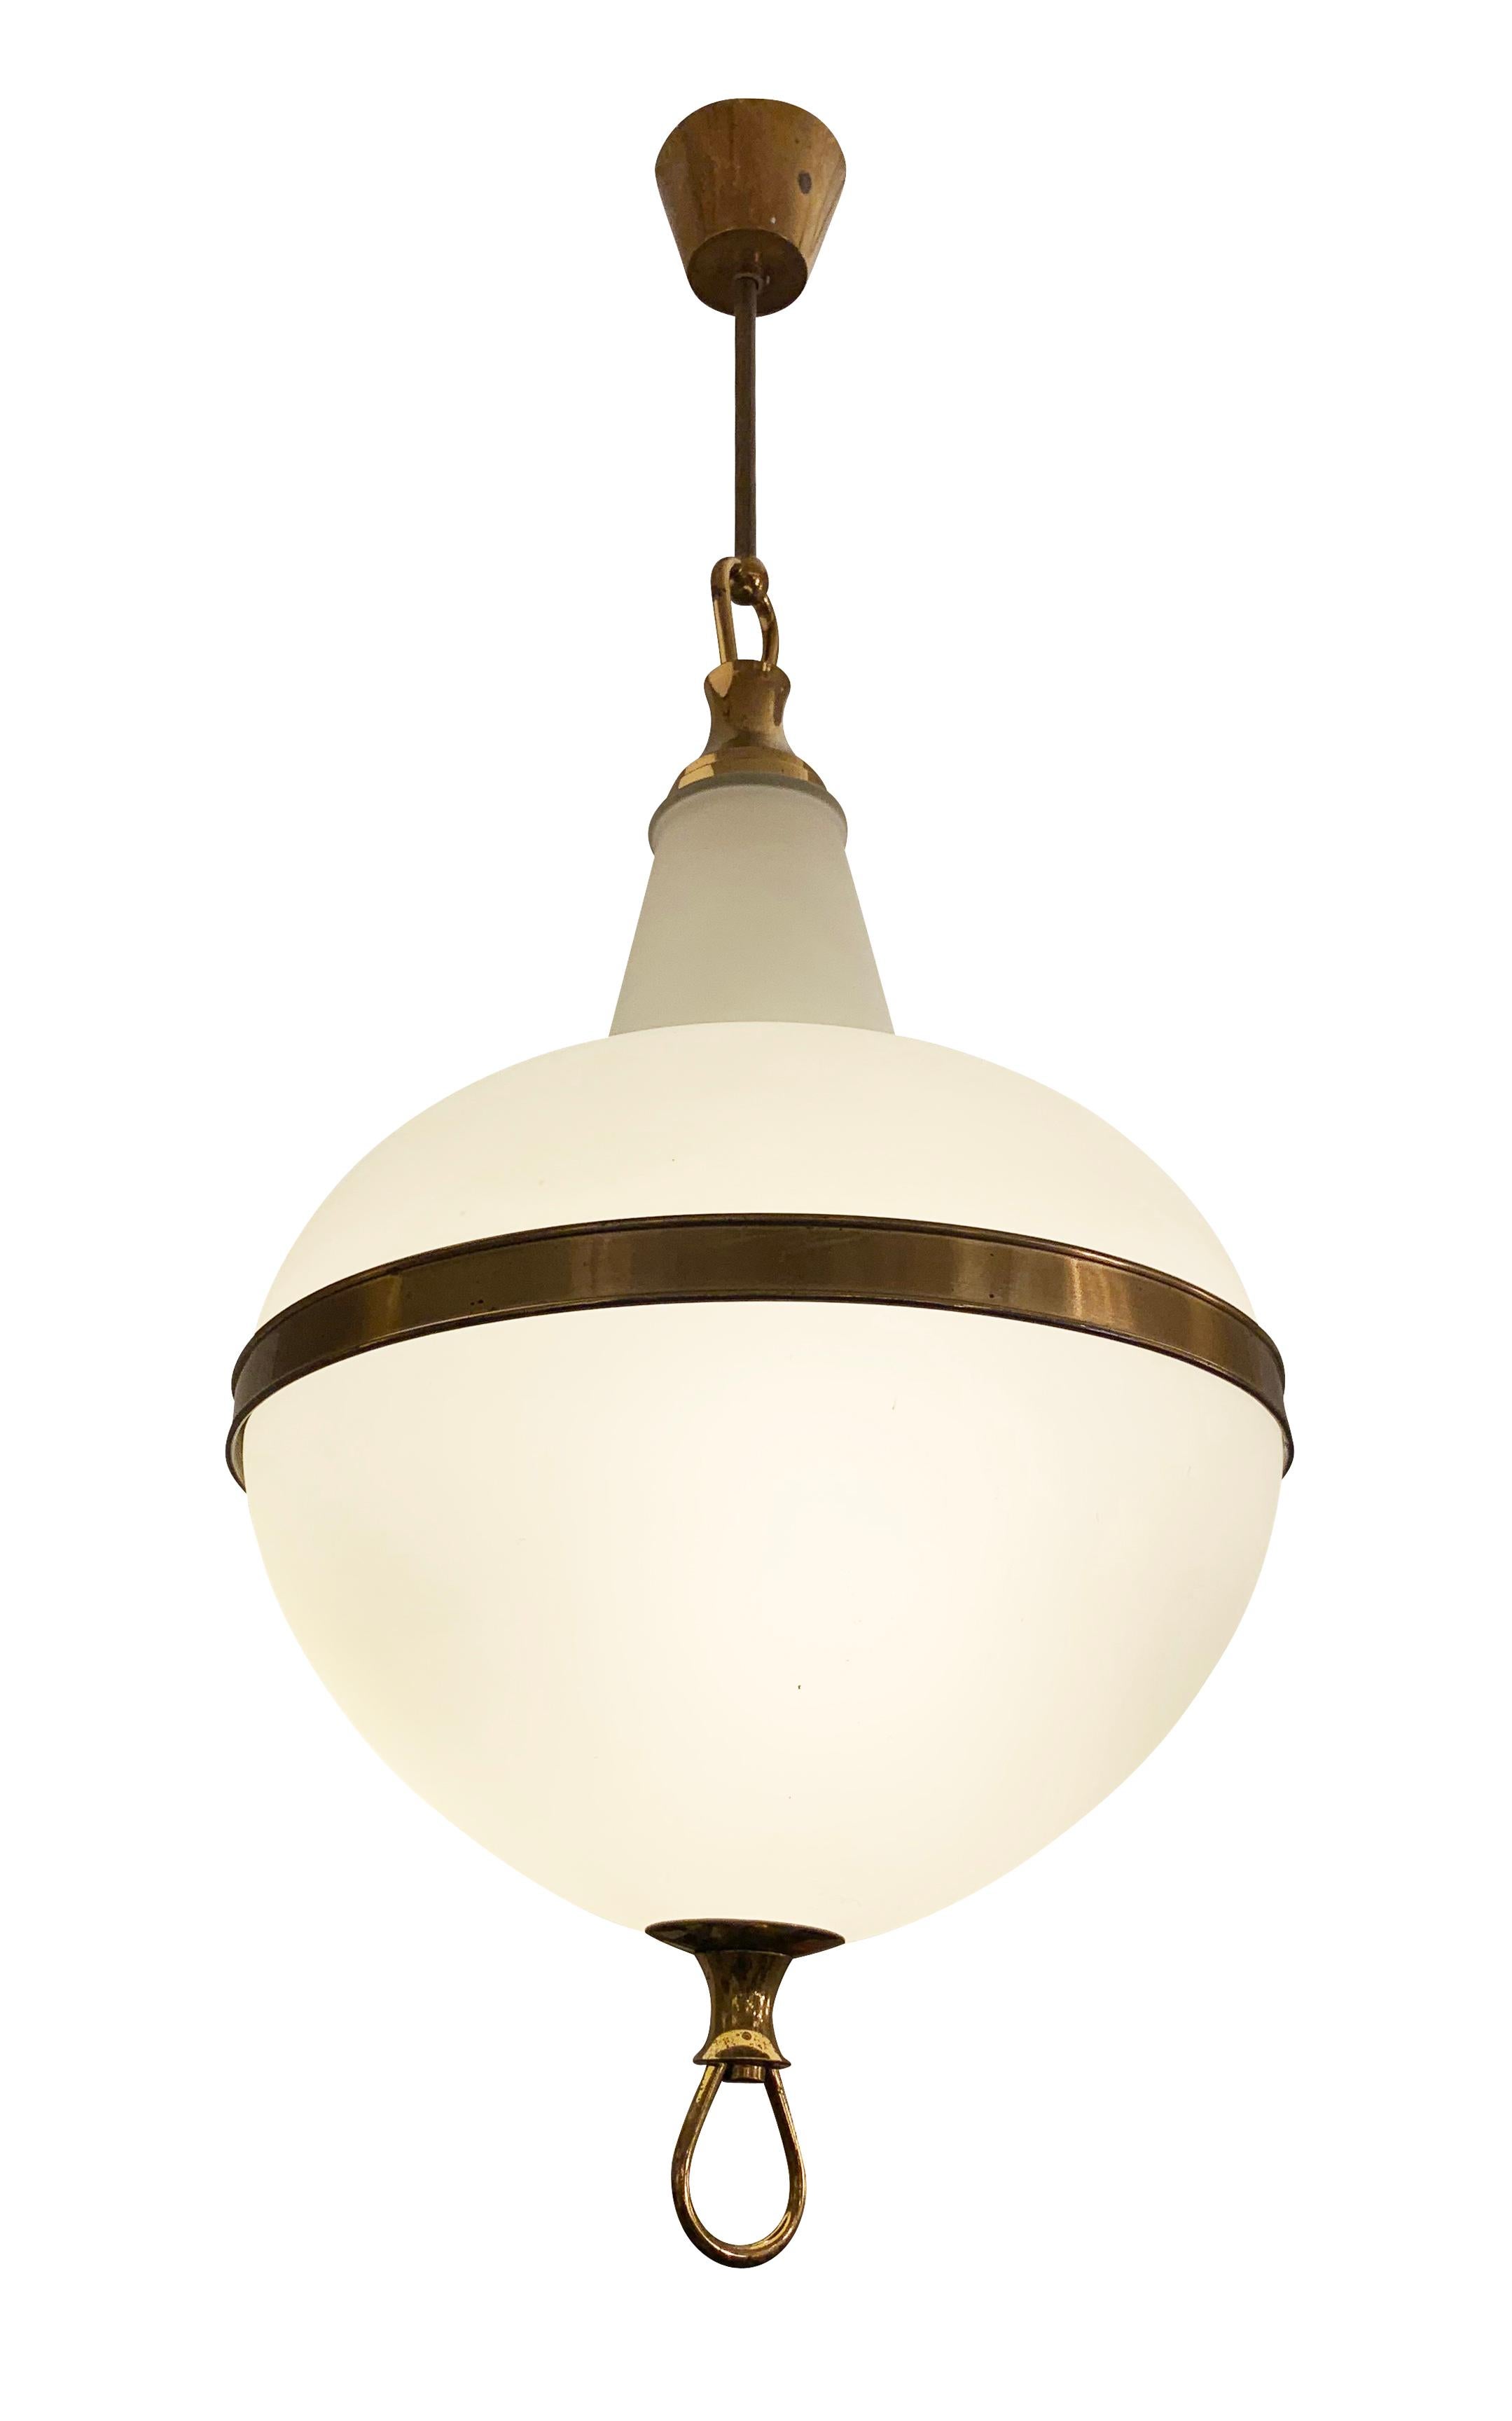 Elegant Italian midcentury pendant with frosted glass diffusers and brass hardware.

Condition: Excellent vintage condition, minor wear consistent with age and use.

Diameter: 14”

Height: 32”.